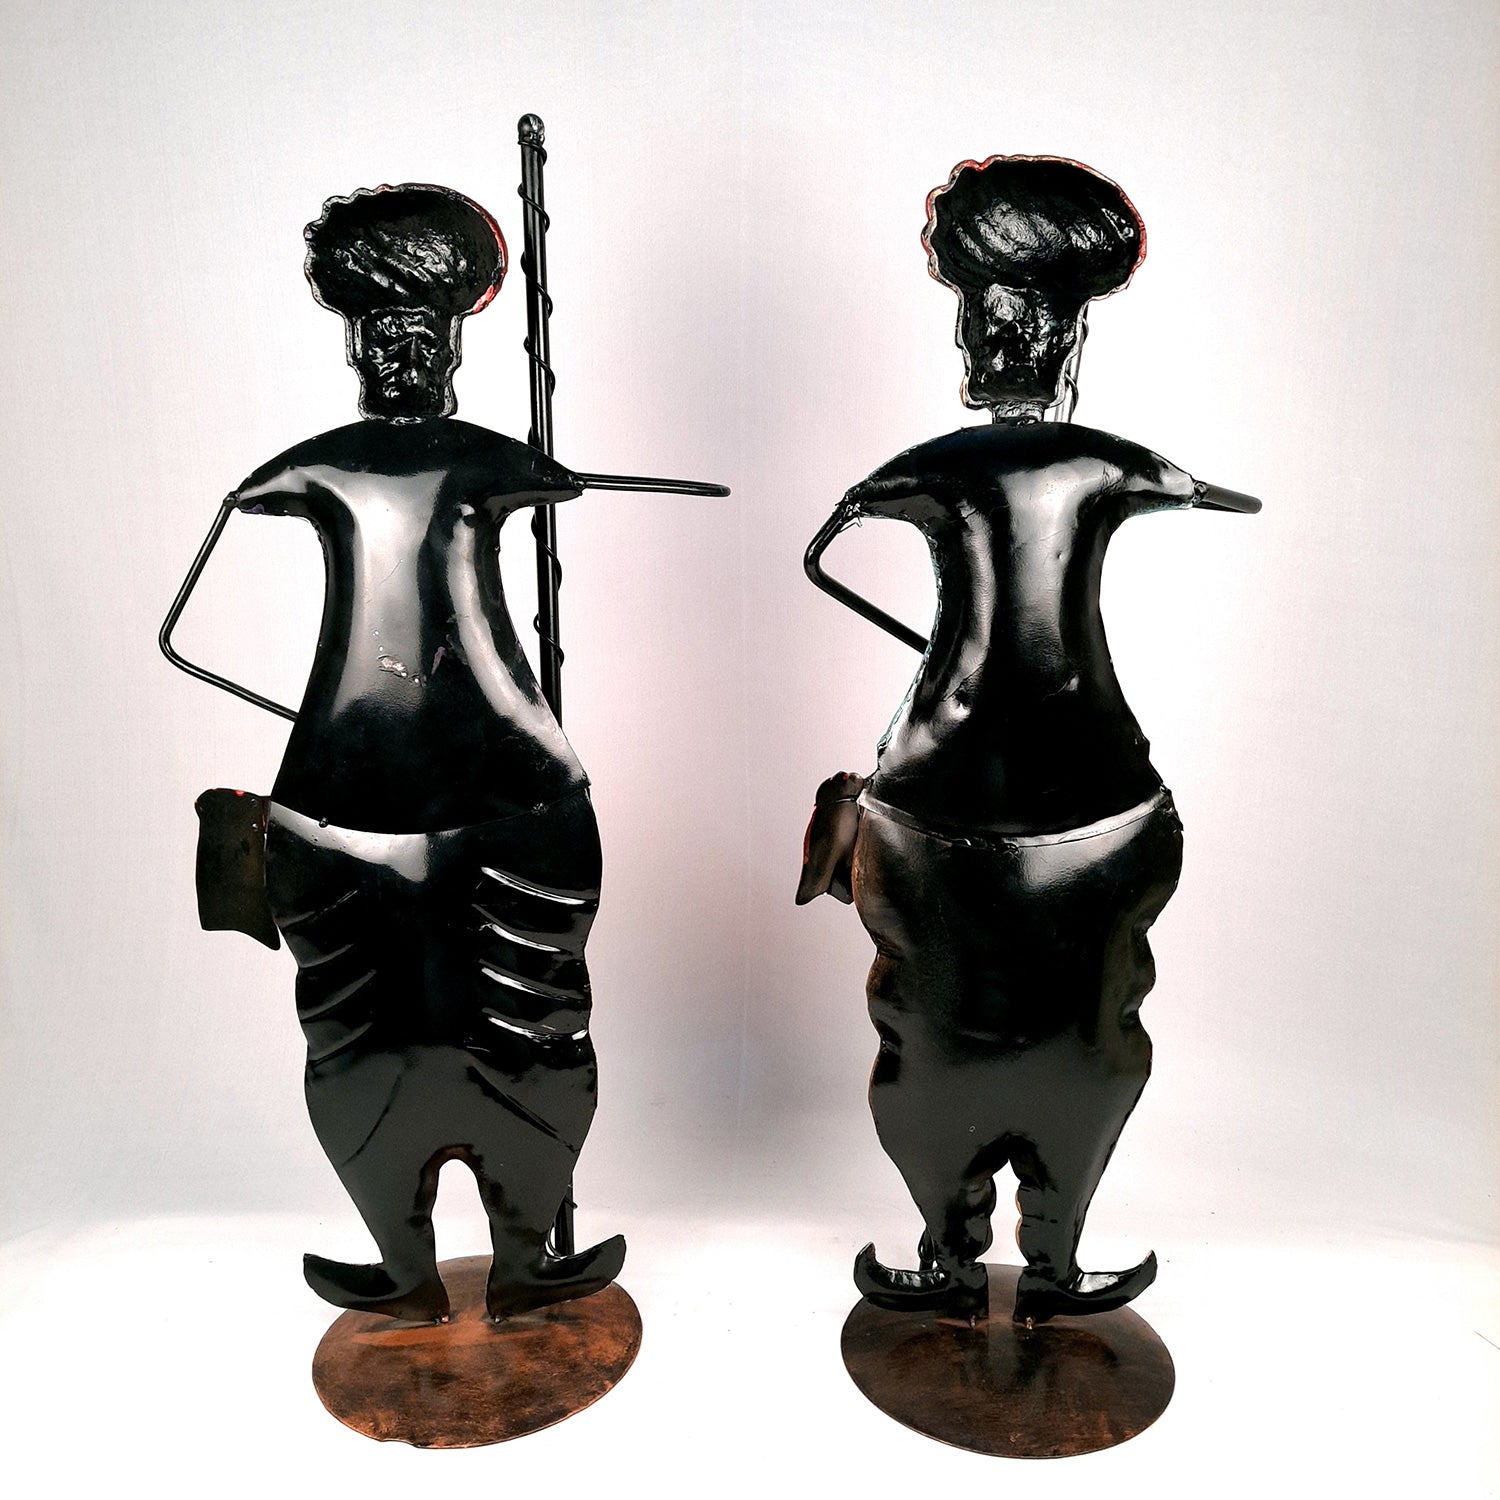 Showpiece Figurine - Darbaan Set | Rajasthani Guard / Village man With Stick | Decorative Showpieces - for Home, Entryway, Living Room, Table Decor & Gifts - 28 Inch (Set of 2) - Apkamart